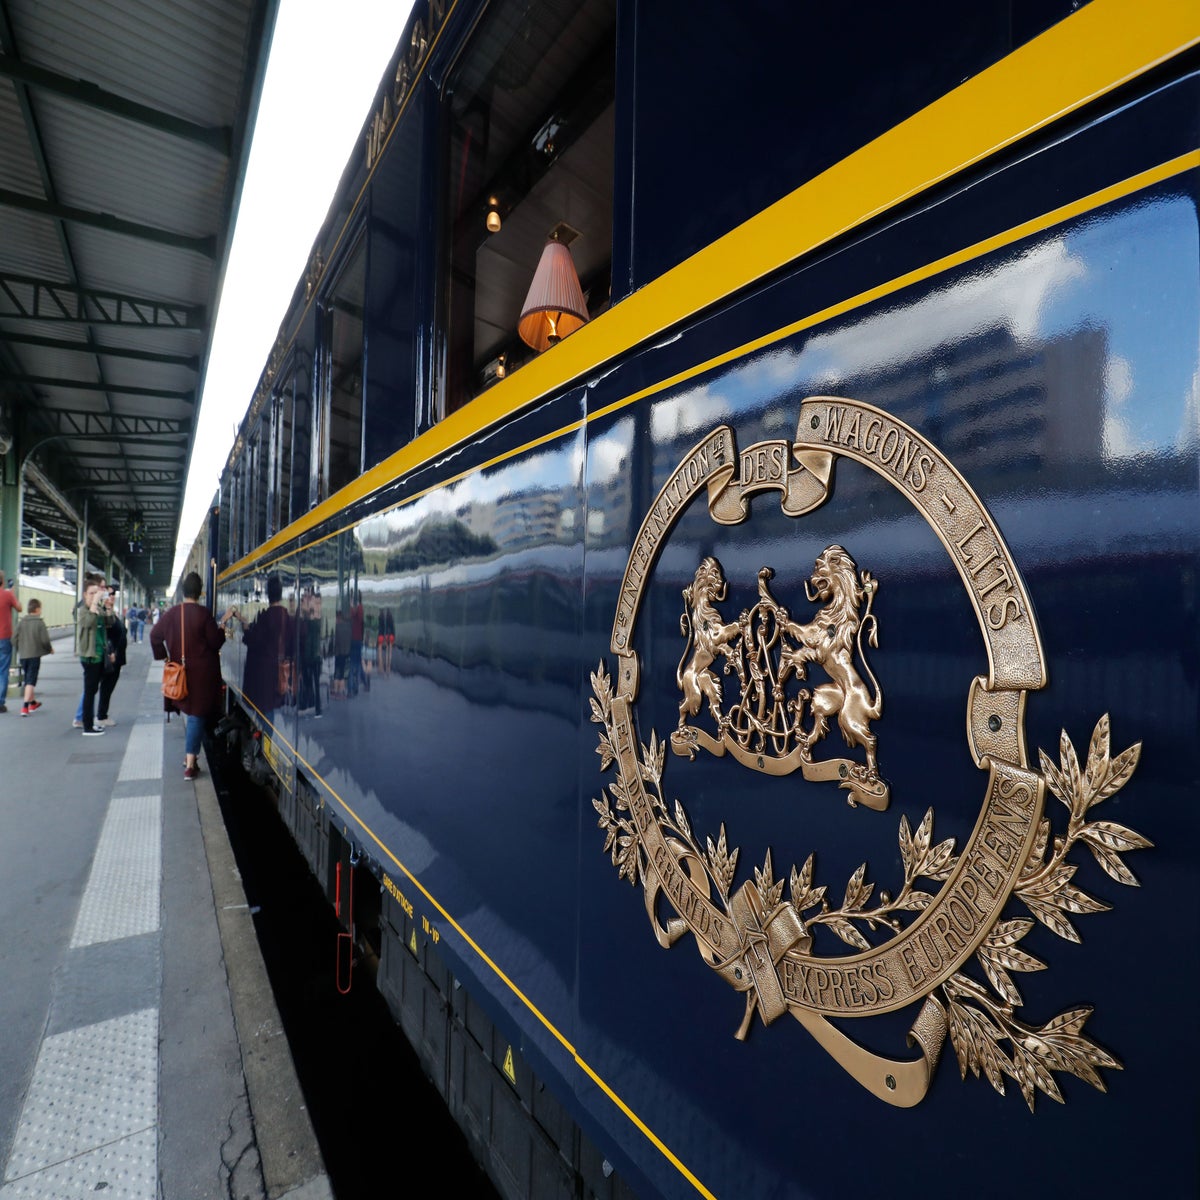 Orient Express to axe UK section after 41 years due to Brexit